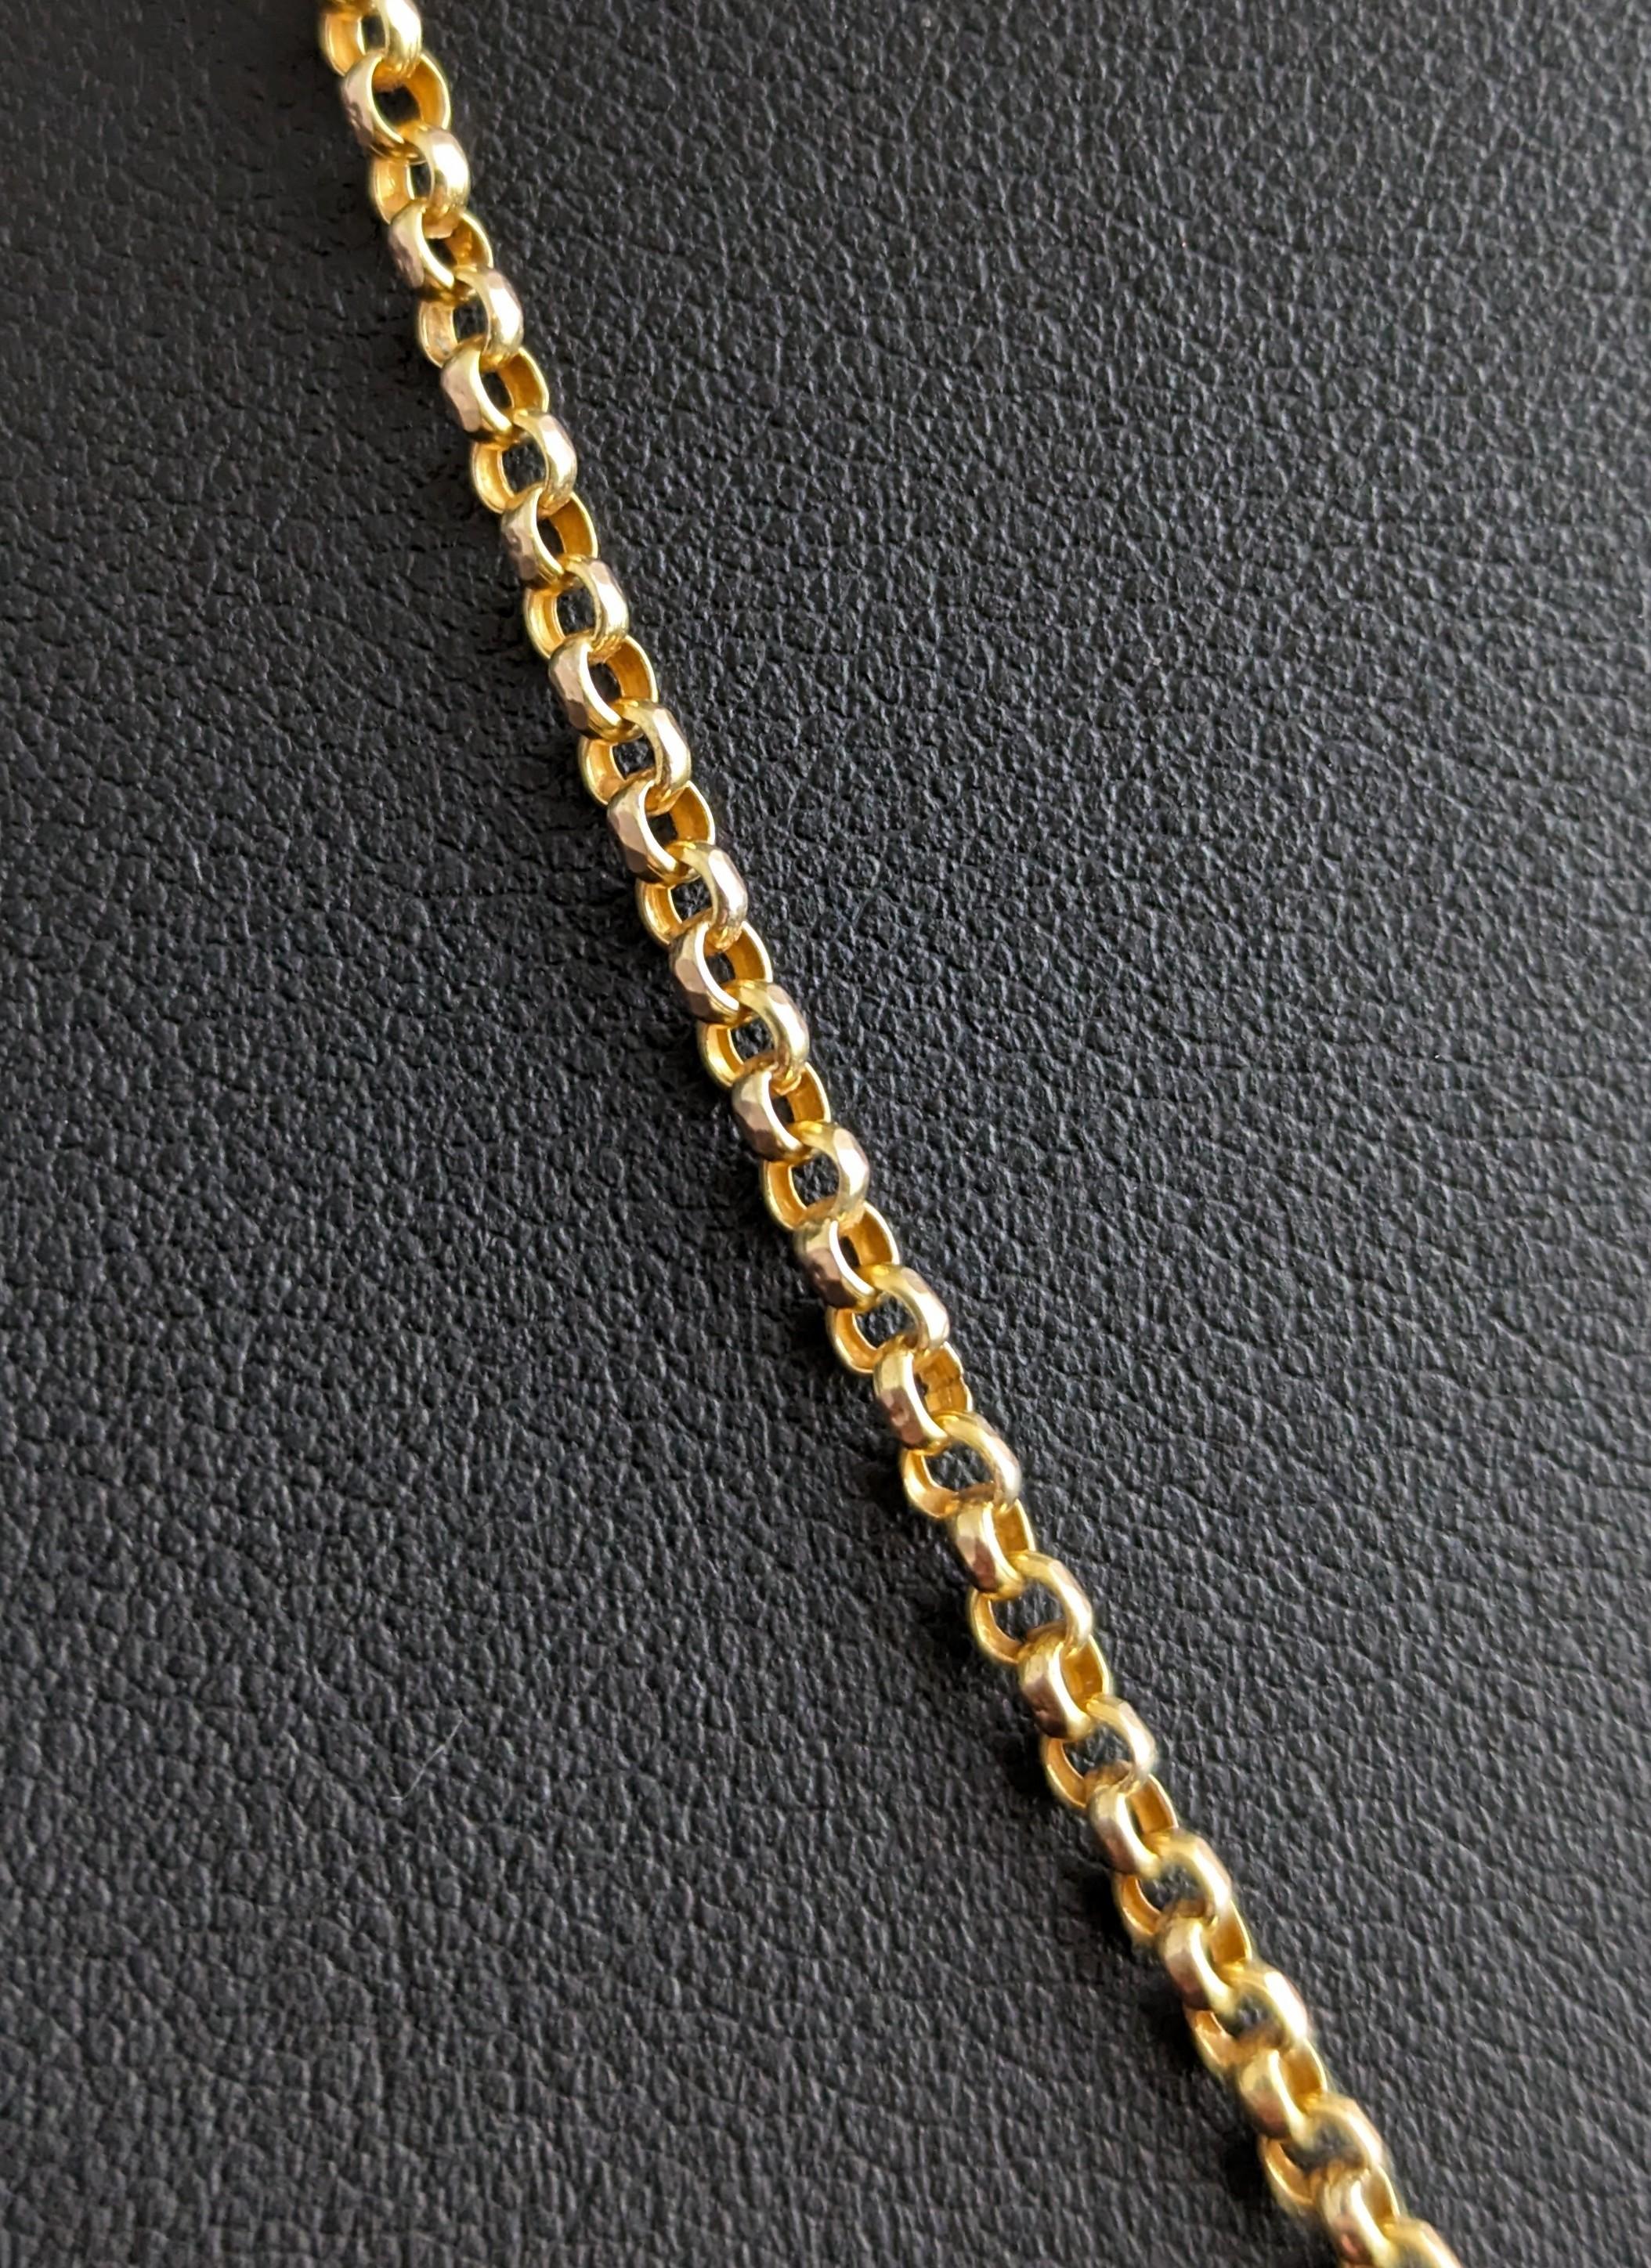 Antique 9k yellow gold Belcher link chain necklace, Edwardian  For Sale 5